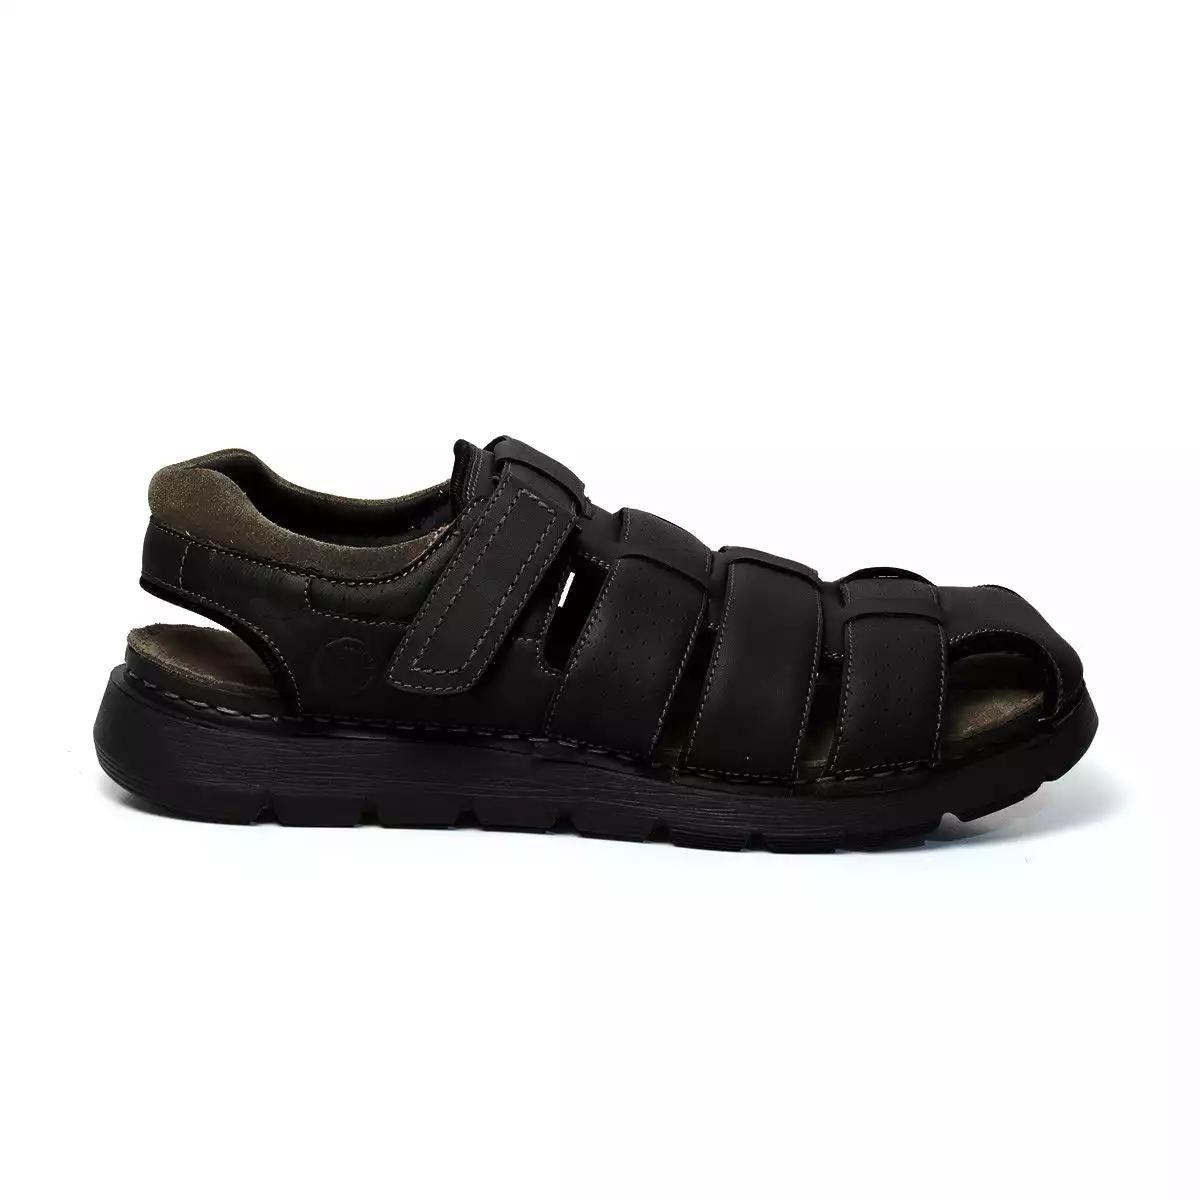 Hush Puppies Sports Sandals - Buy Hush Puppies Sports Sandals online in  India